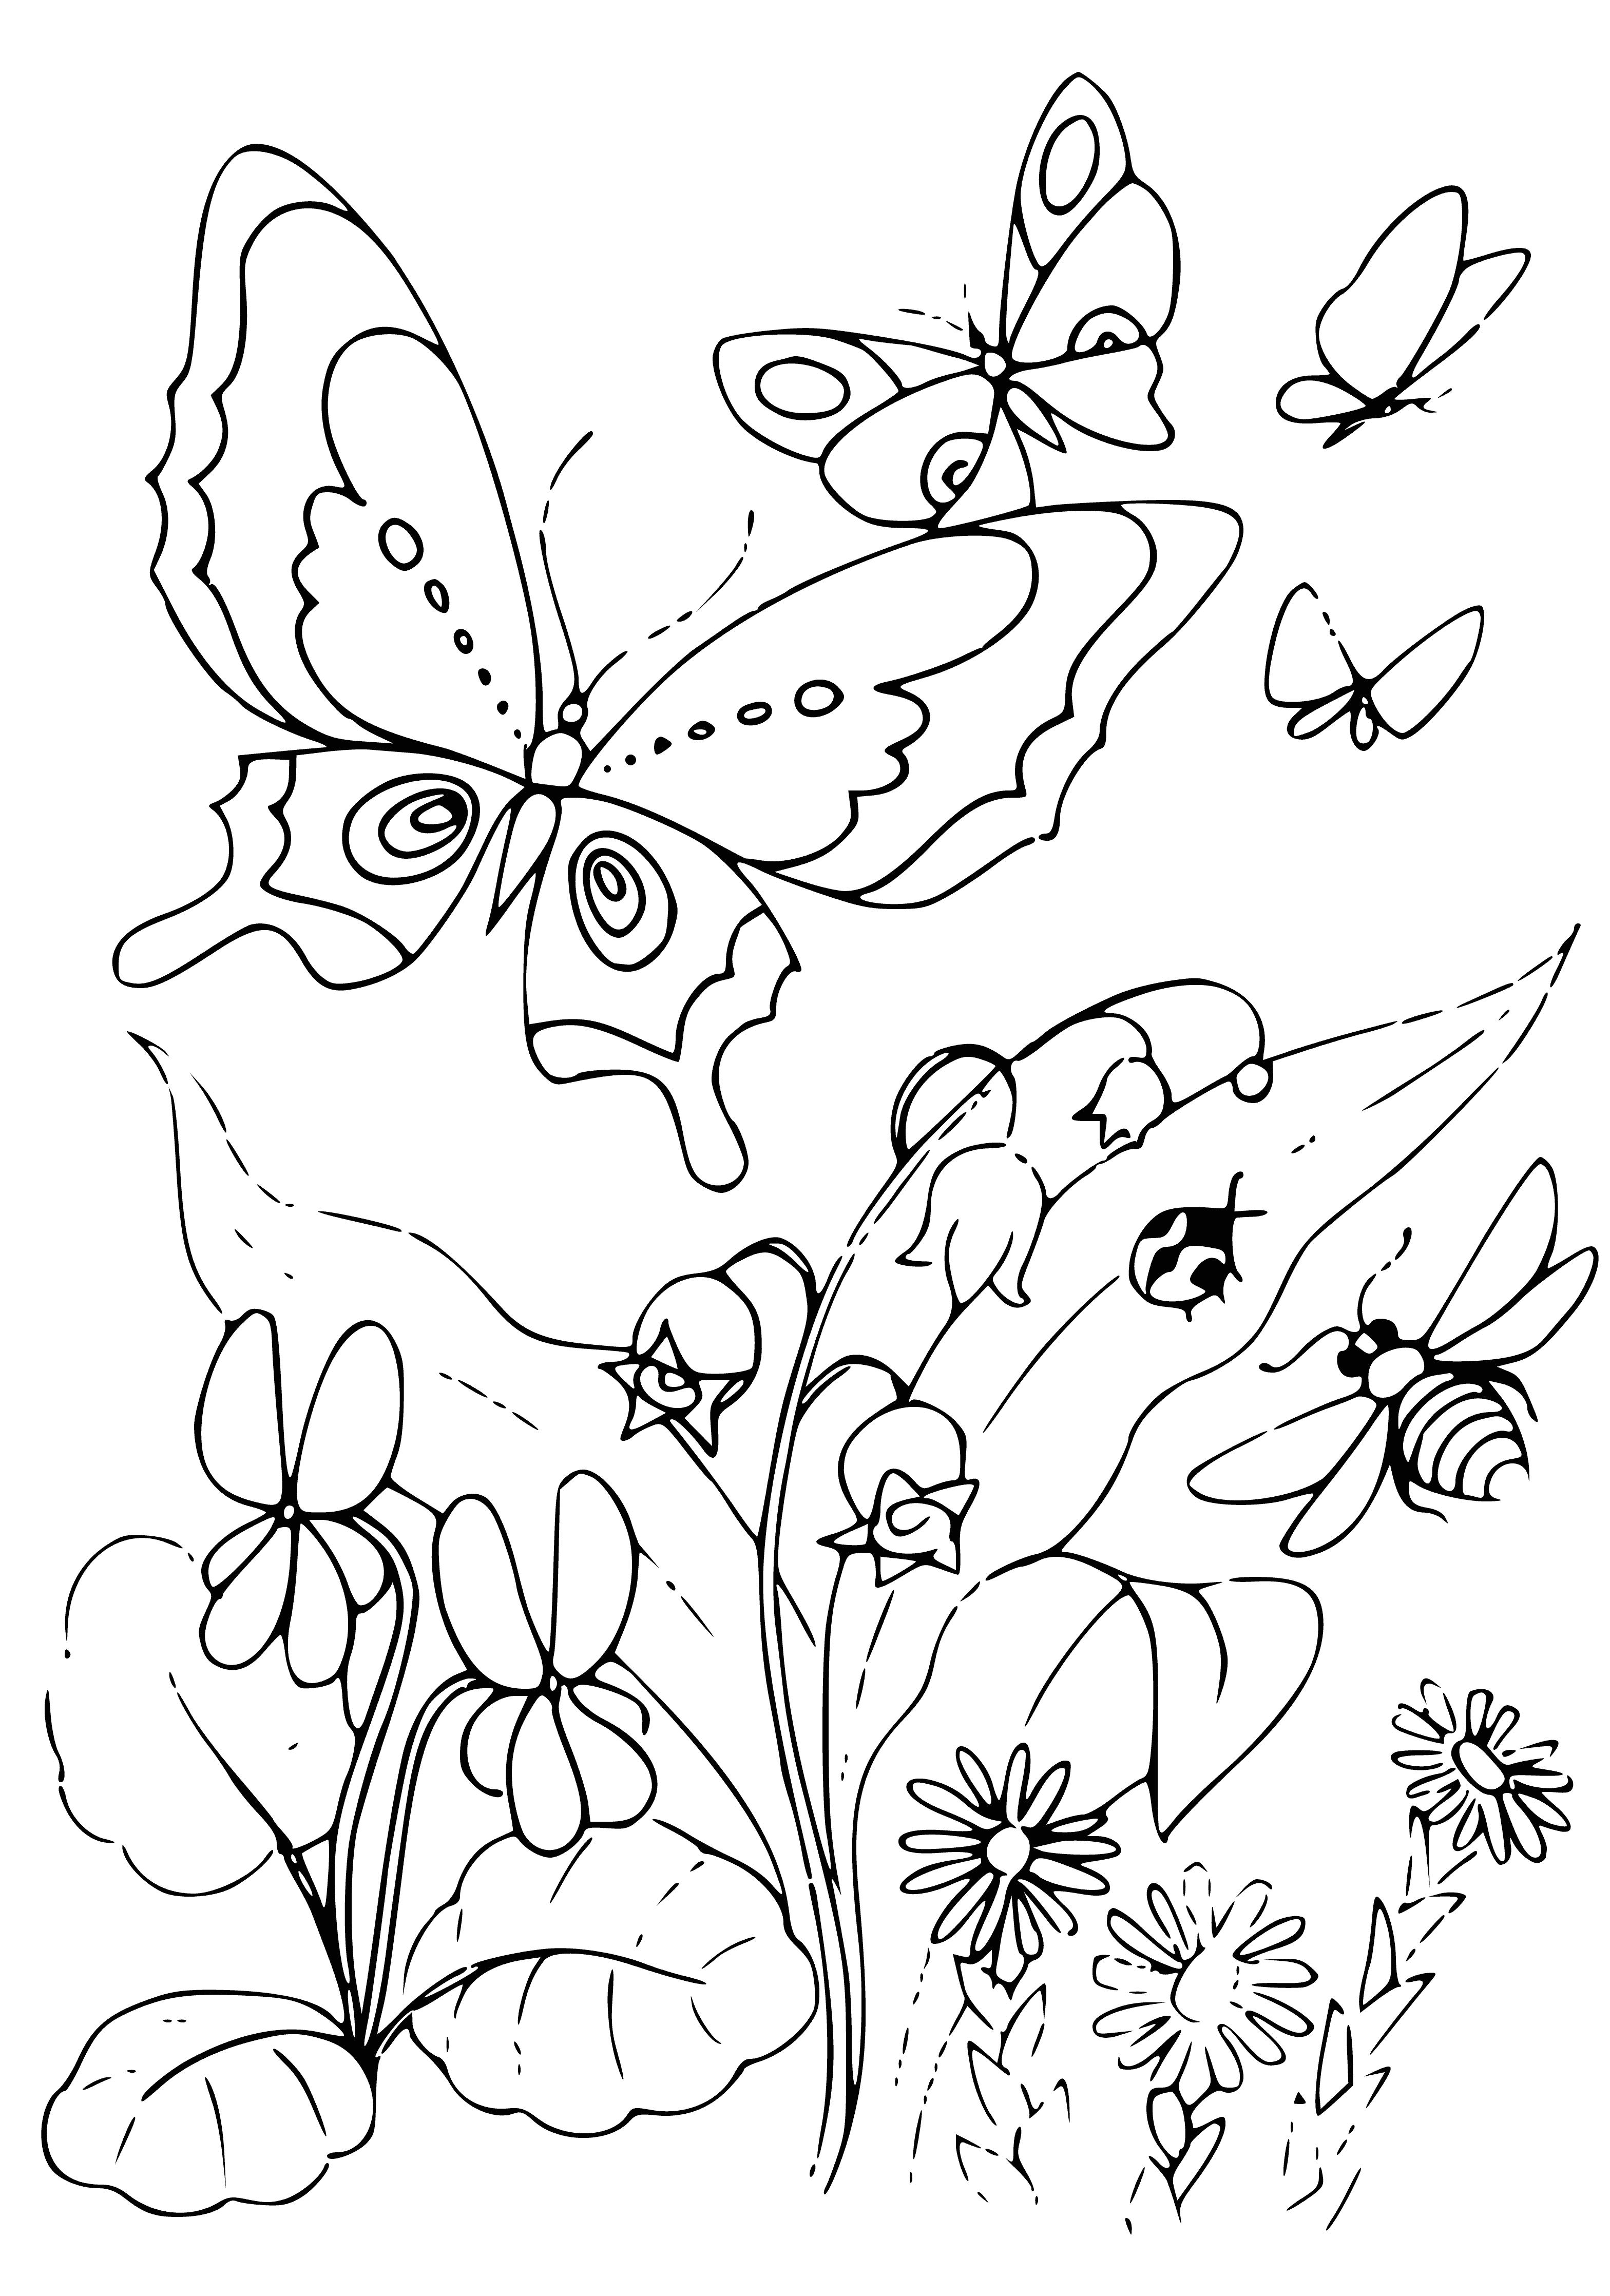 coloring page: 3 lily of the valley coloring pages: white flowers, green stem, 2 leaves. 1 has a yellow bee. #flowerpower